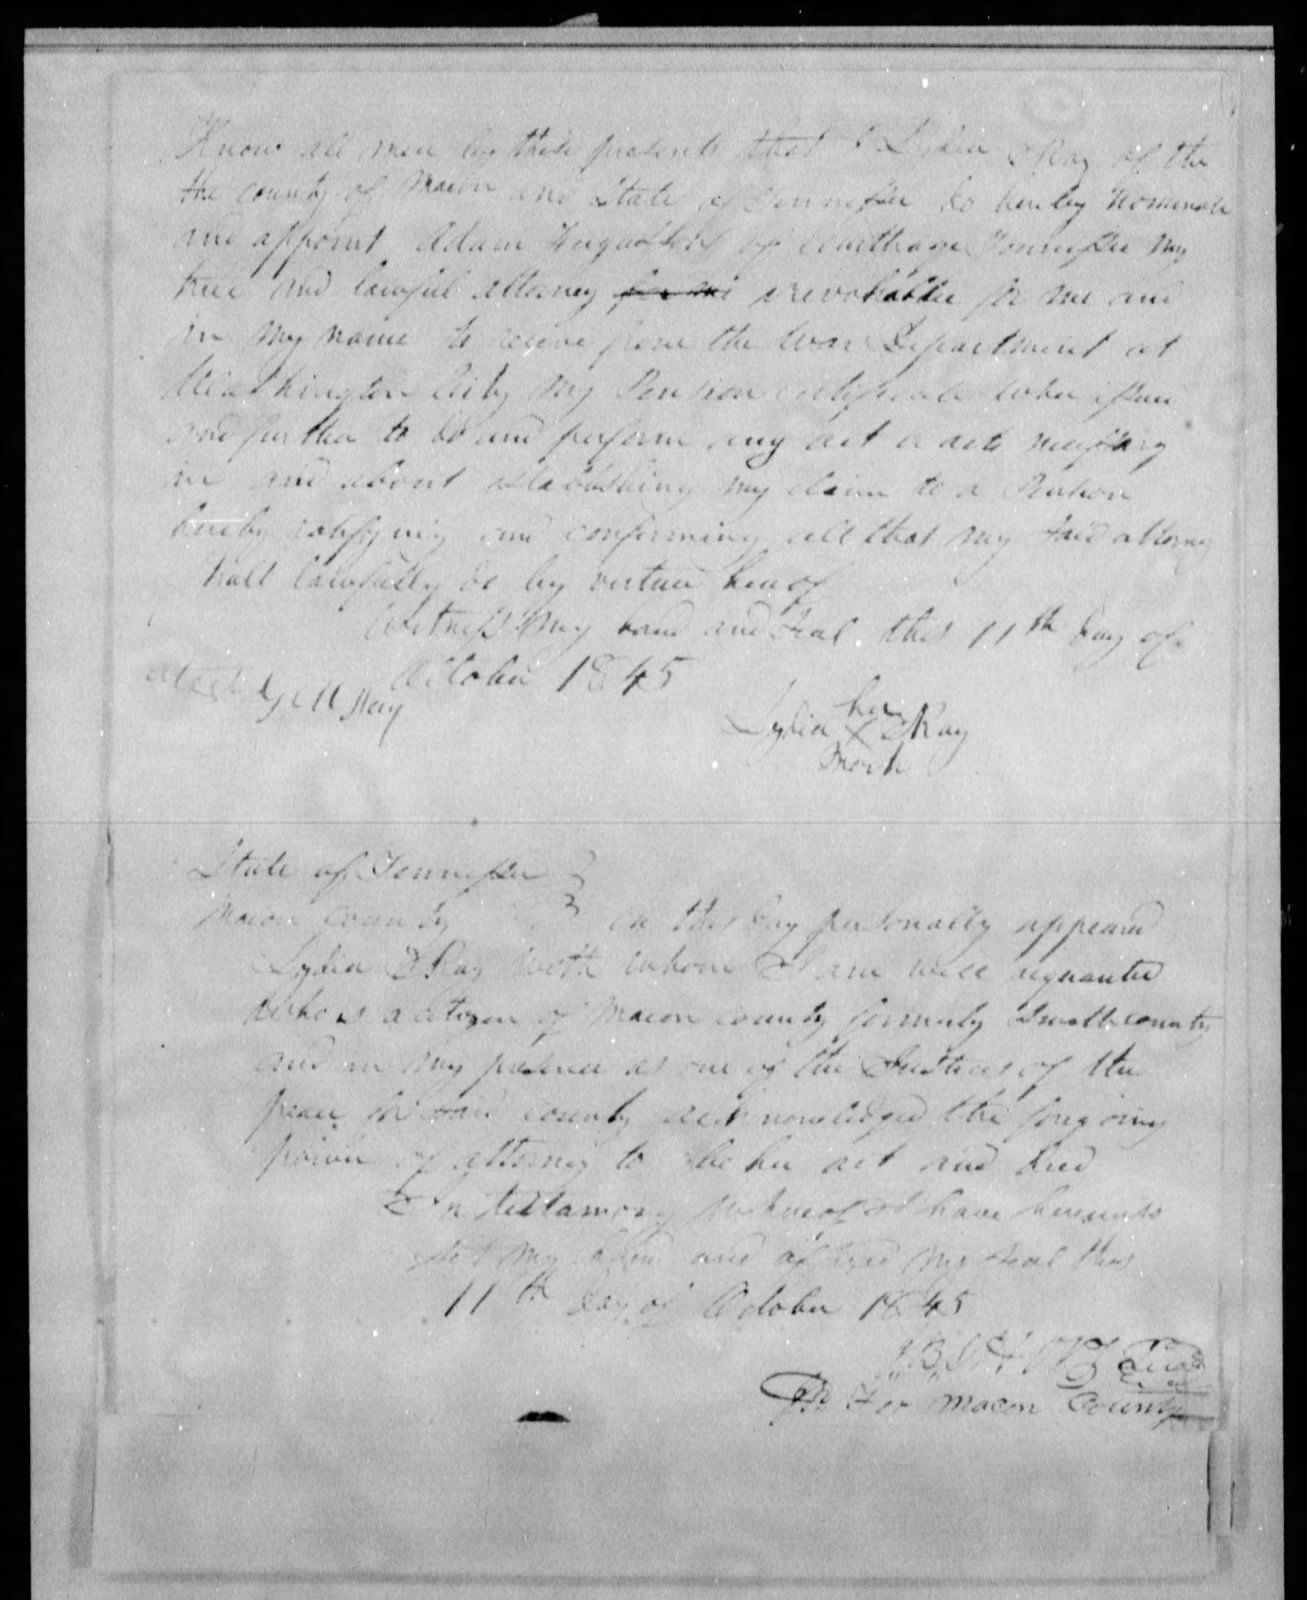 Application for a Widow's Pension from Lydia Ray, 11 October 1845, page 2